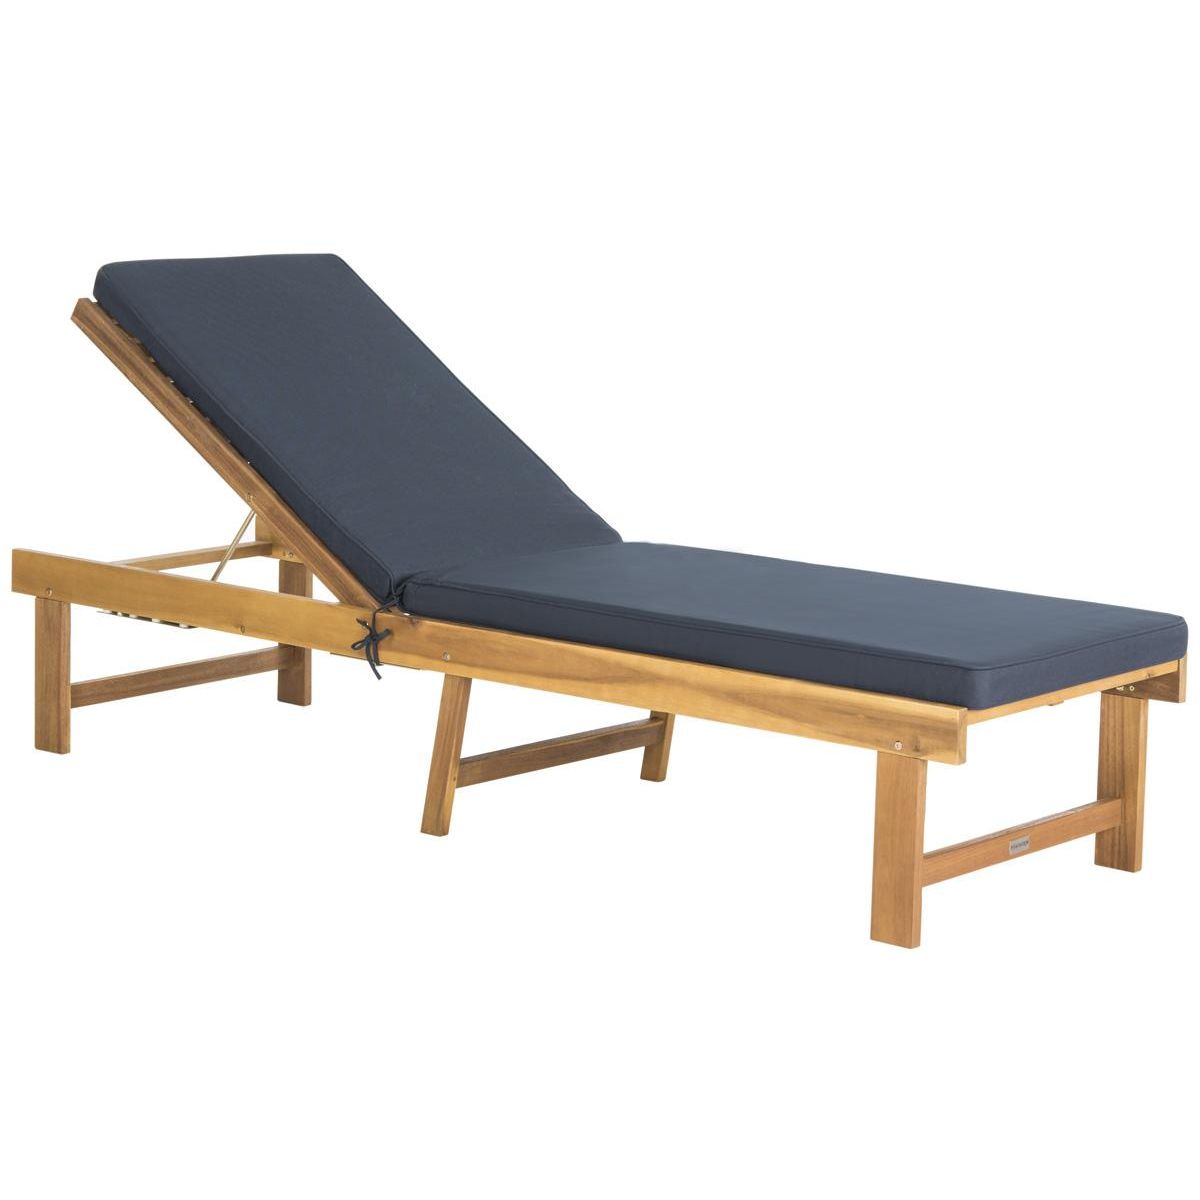 Safavieh Inglewood Chaise Lounge Chair , PAT6723 - Natural/Navy